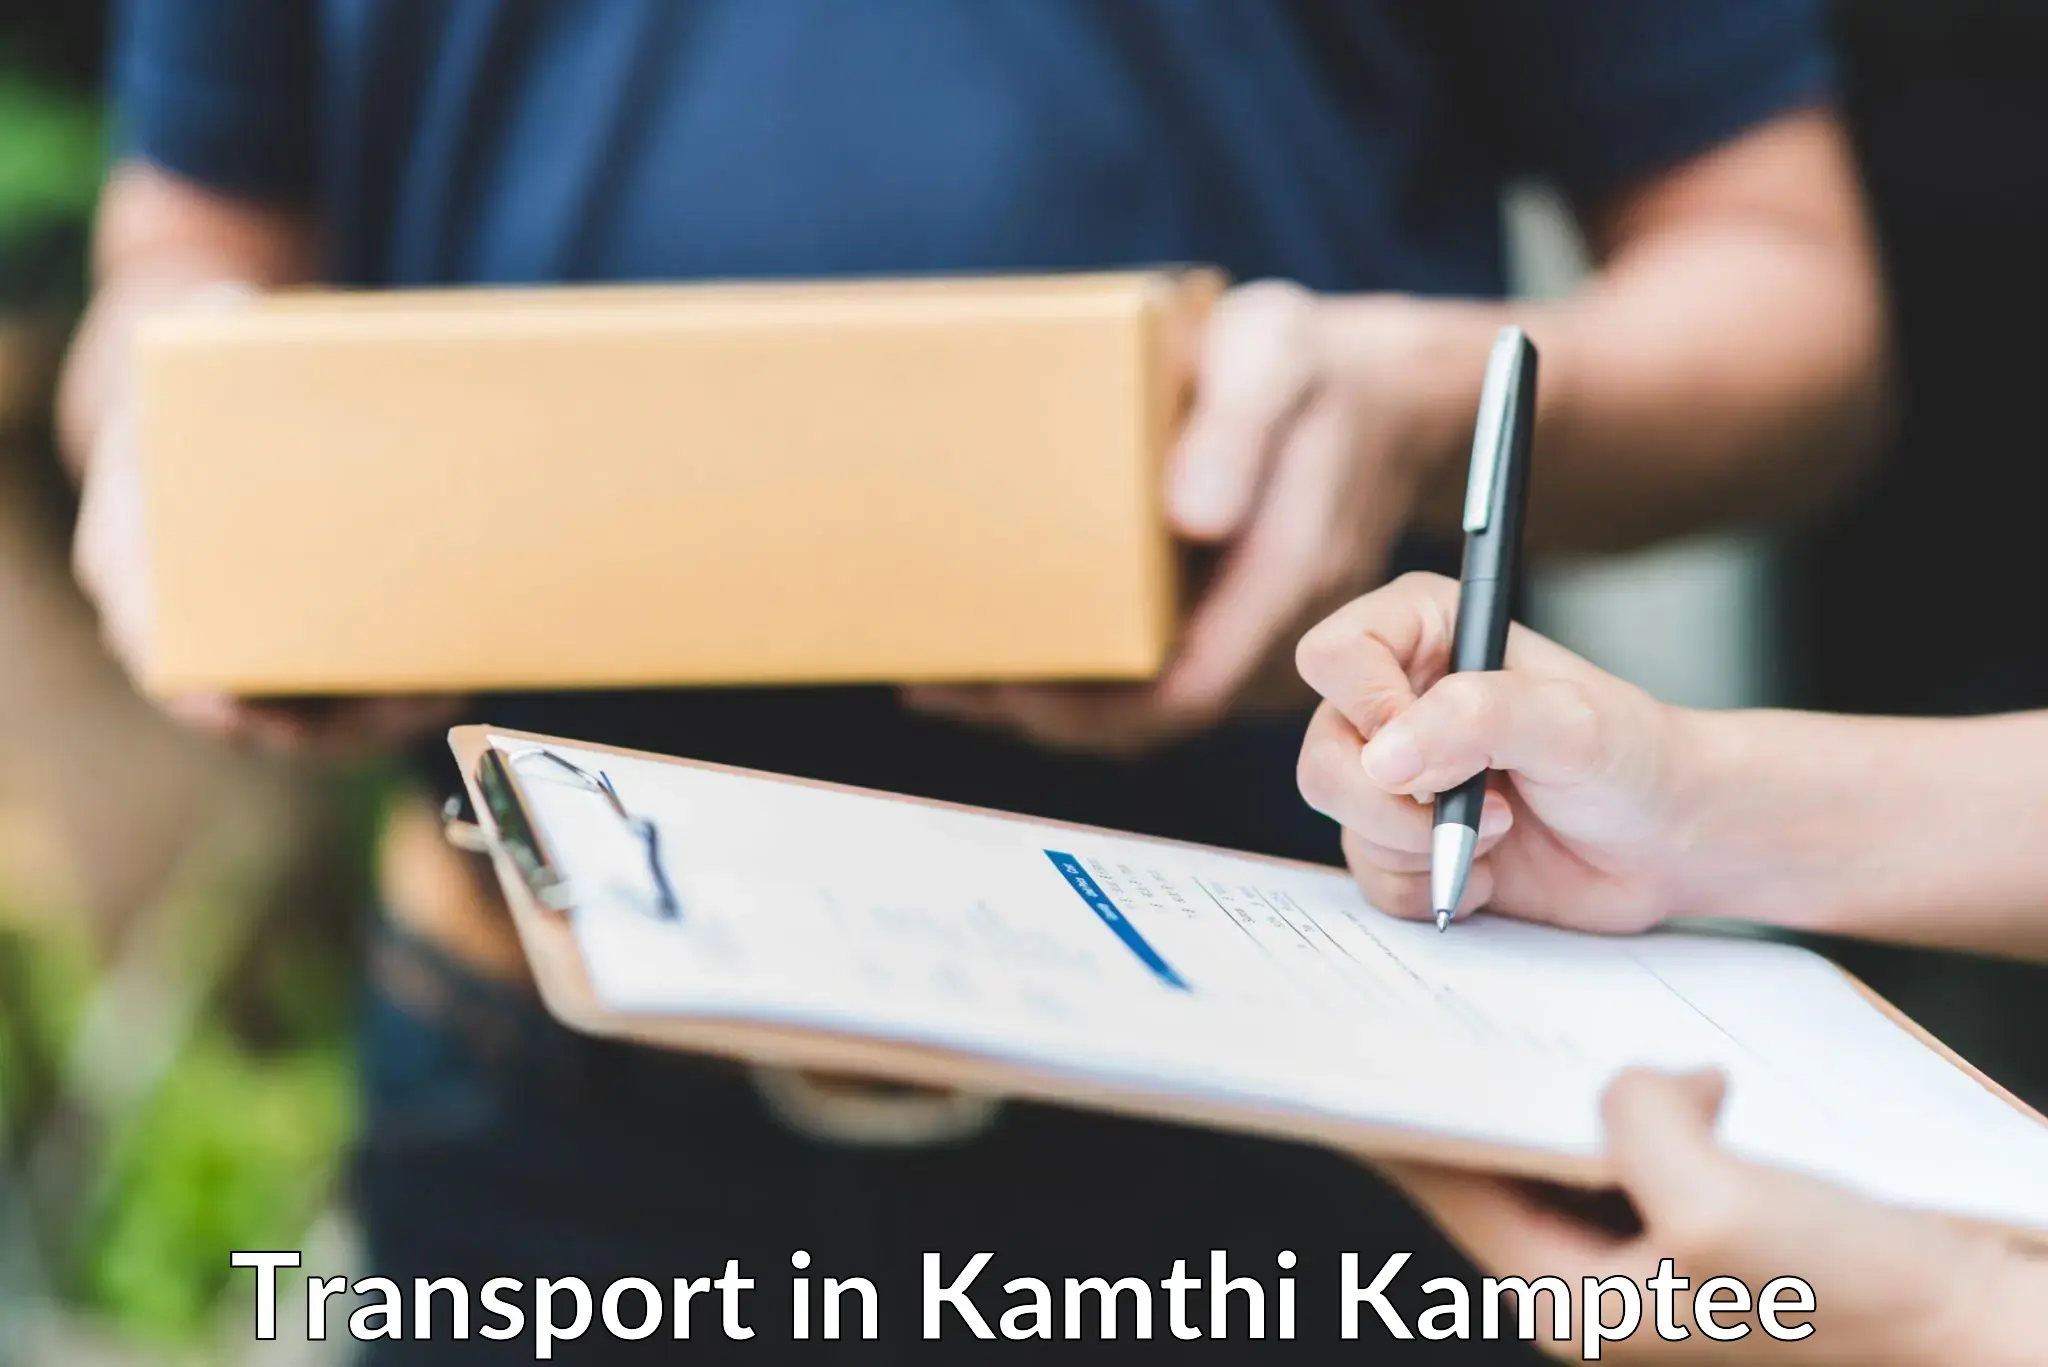 Transport shared services in Kamthi Kamptee